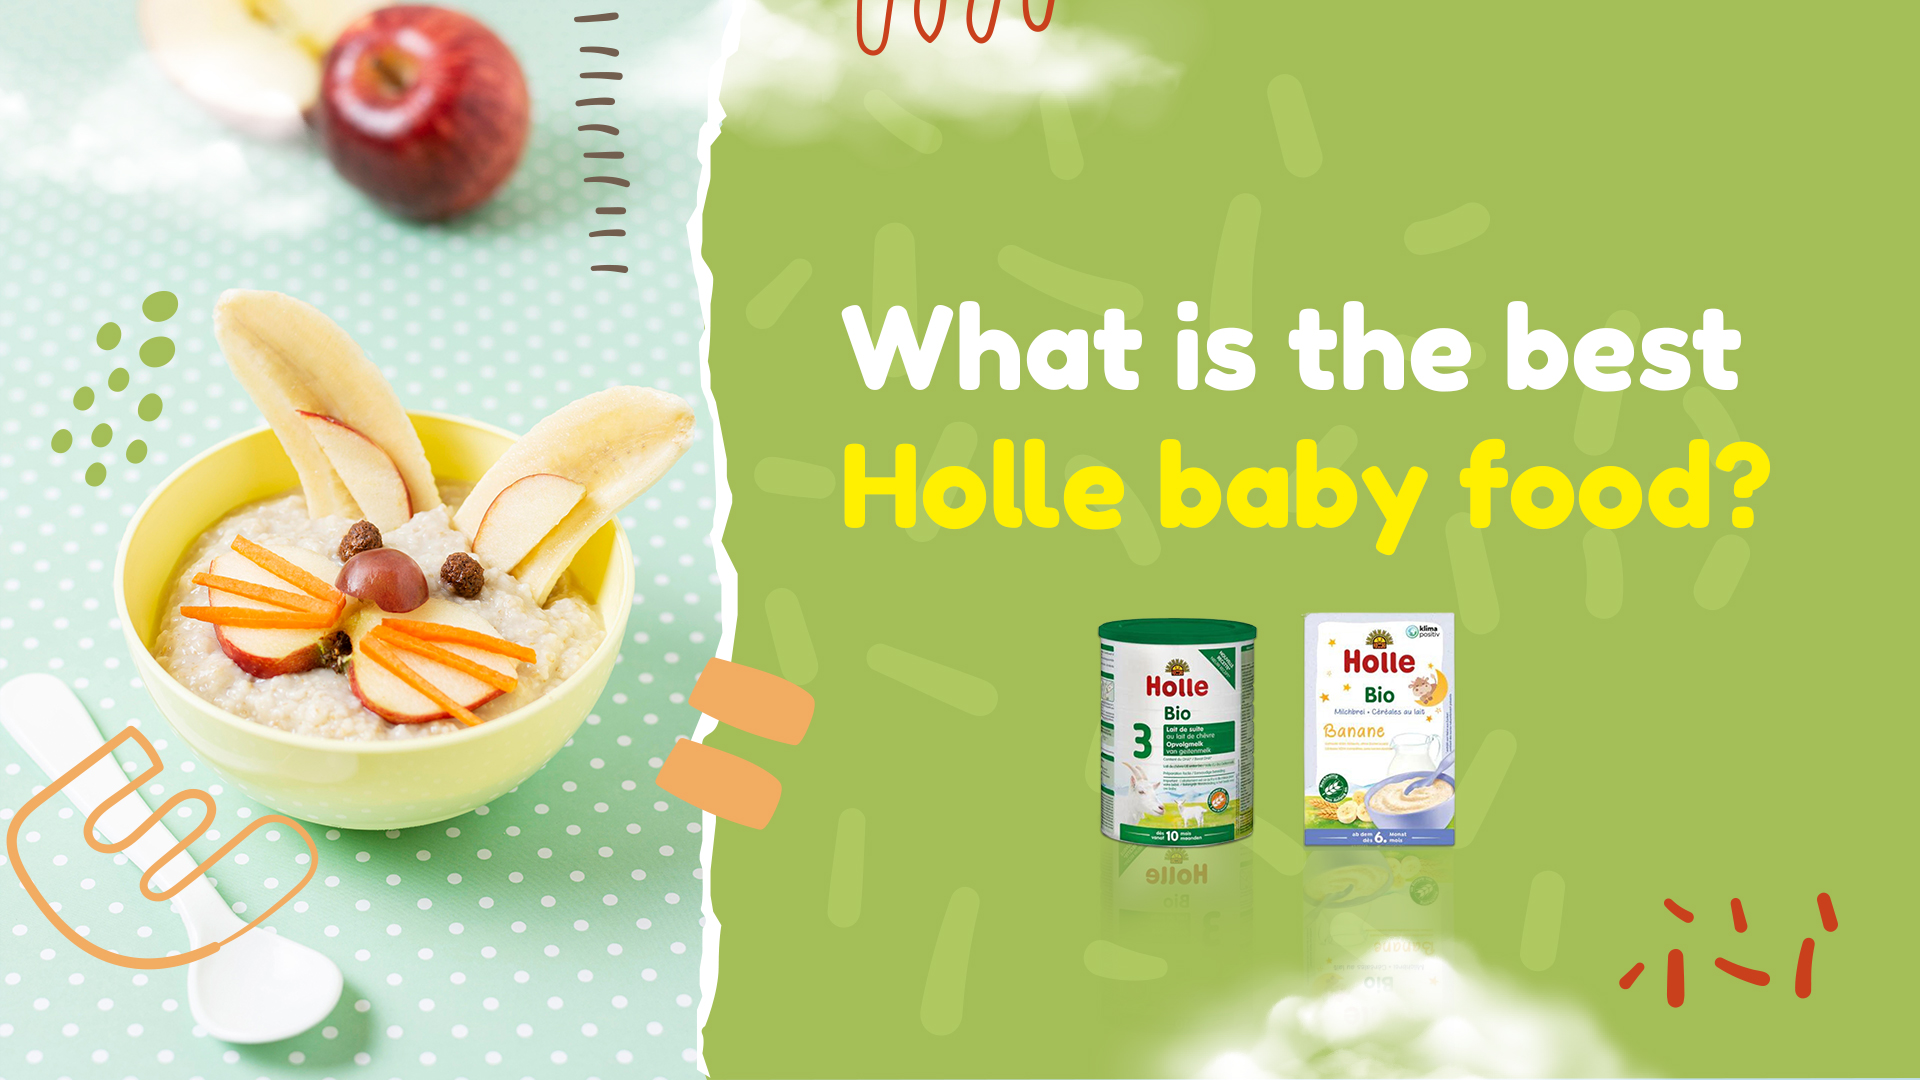 WHAT IS THE BEST HOLLE BABY FOOD?